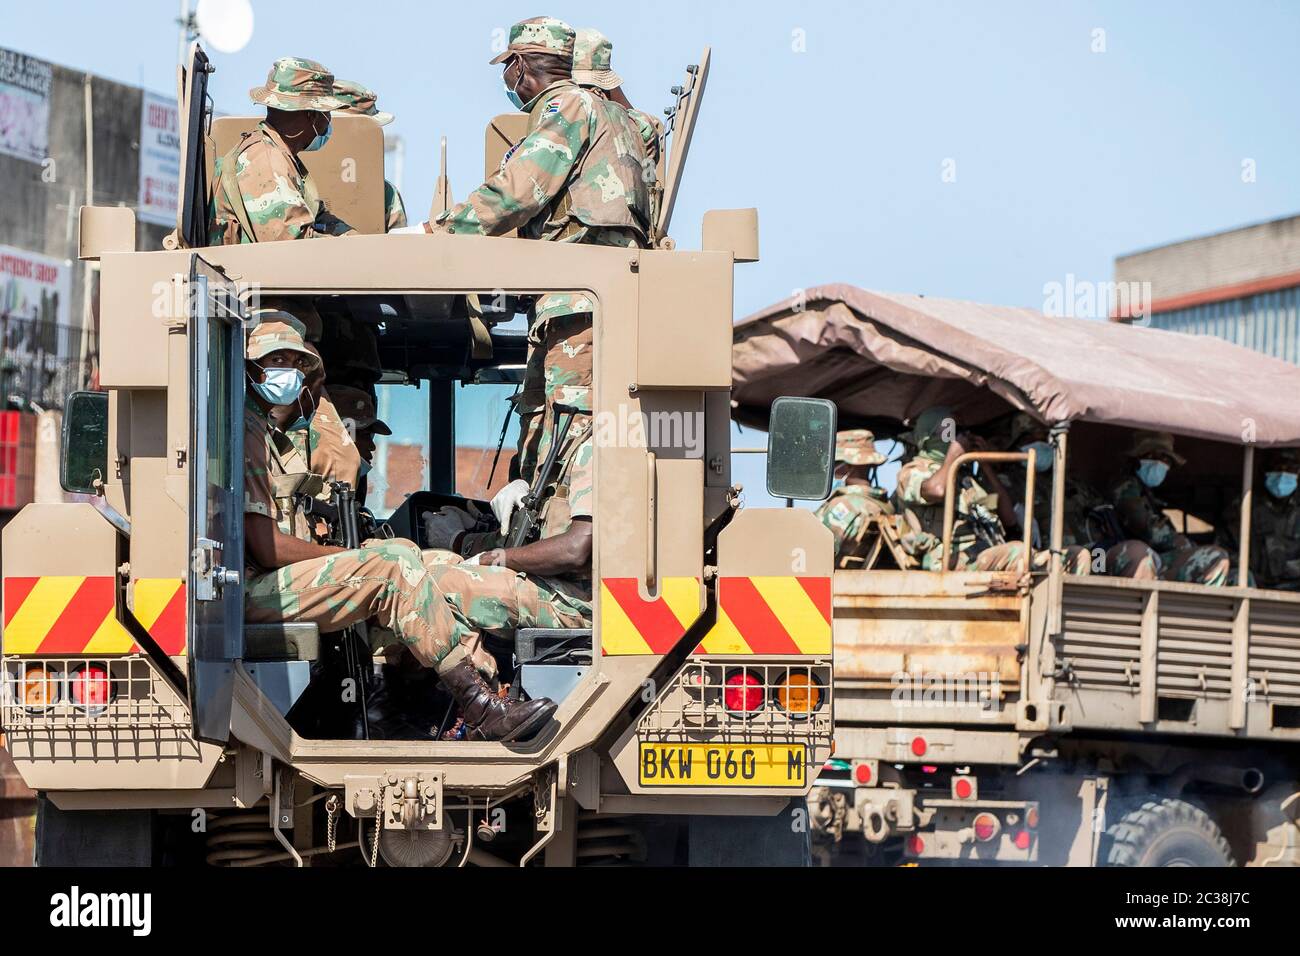 South African military patrol Durban in South Africa Stock Photo